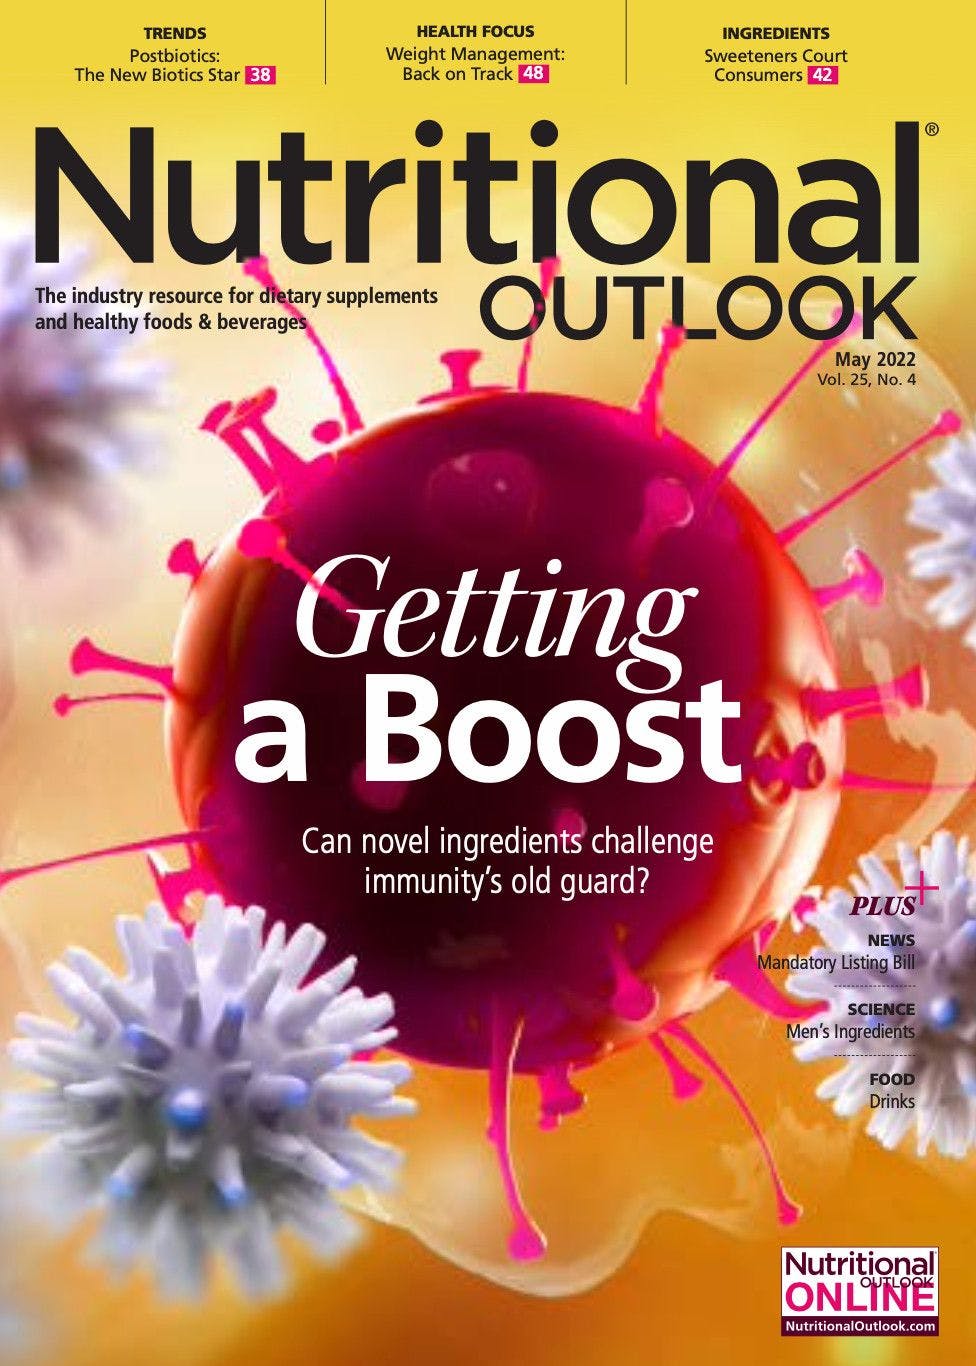 Nutritional Outlook Vol. 25 No. 4